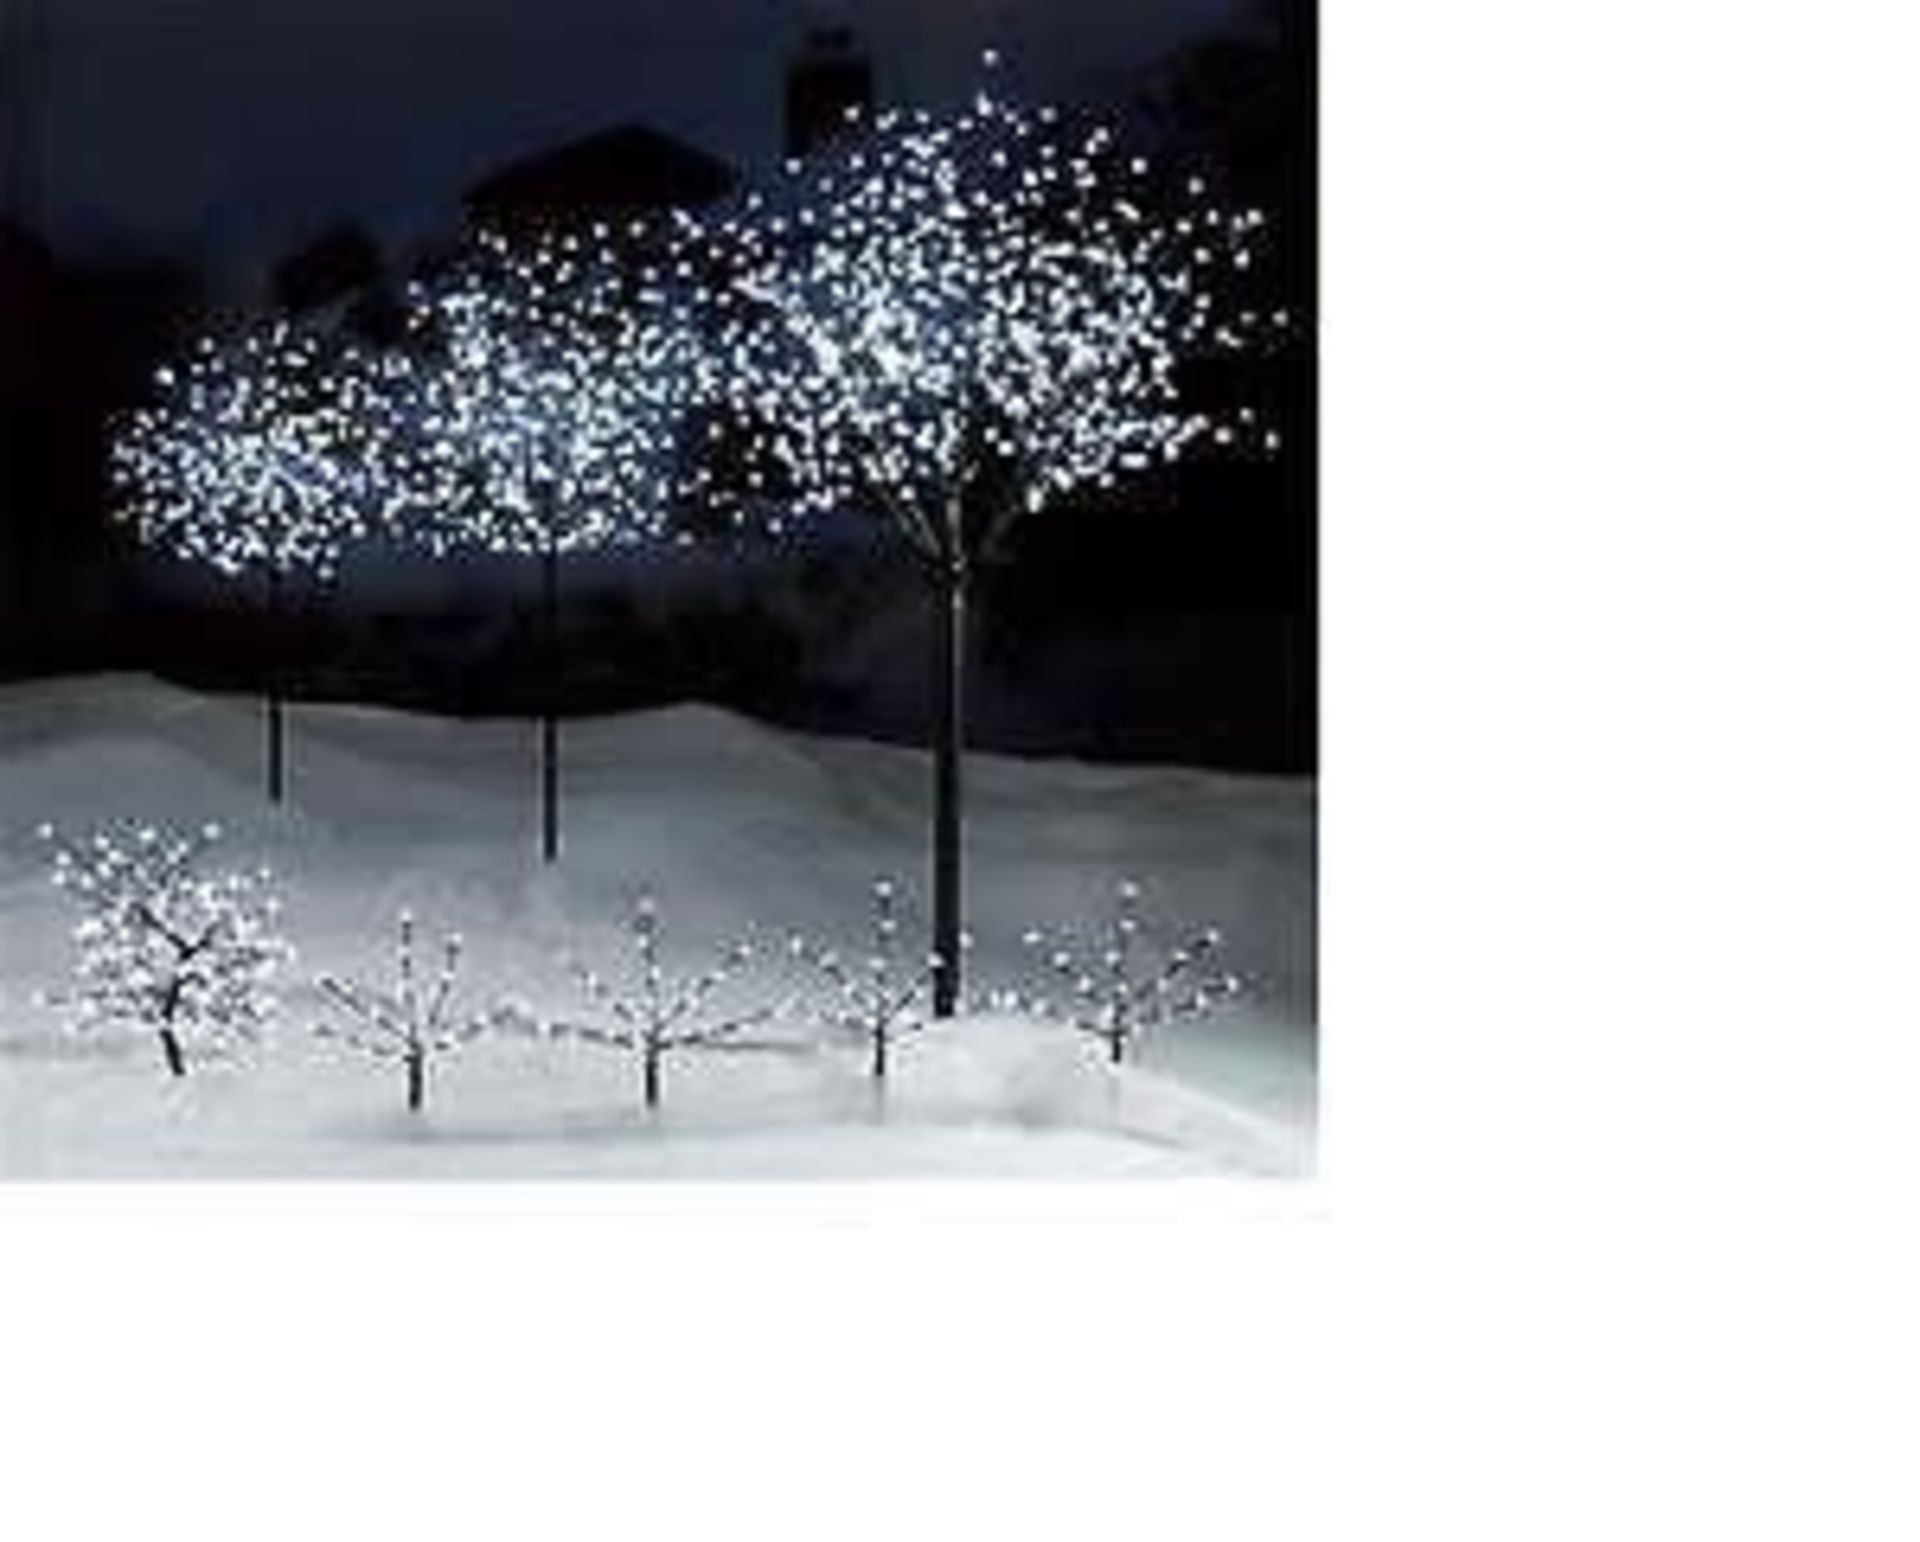 + VAT Brand New 150cm Snow White LED Blossom Tree For Indoor And Outdoor Use RRP £54.99 - Image 3 of 3